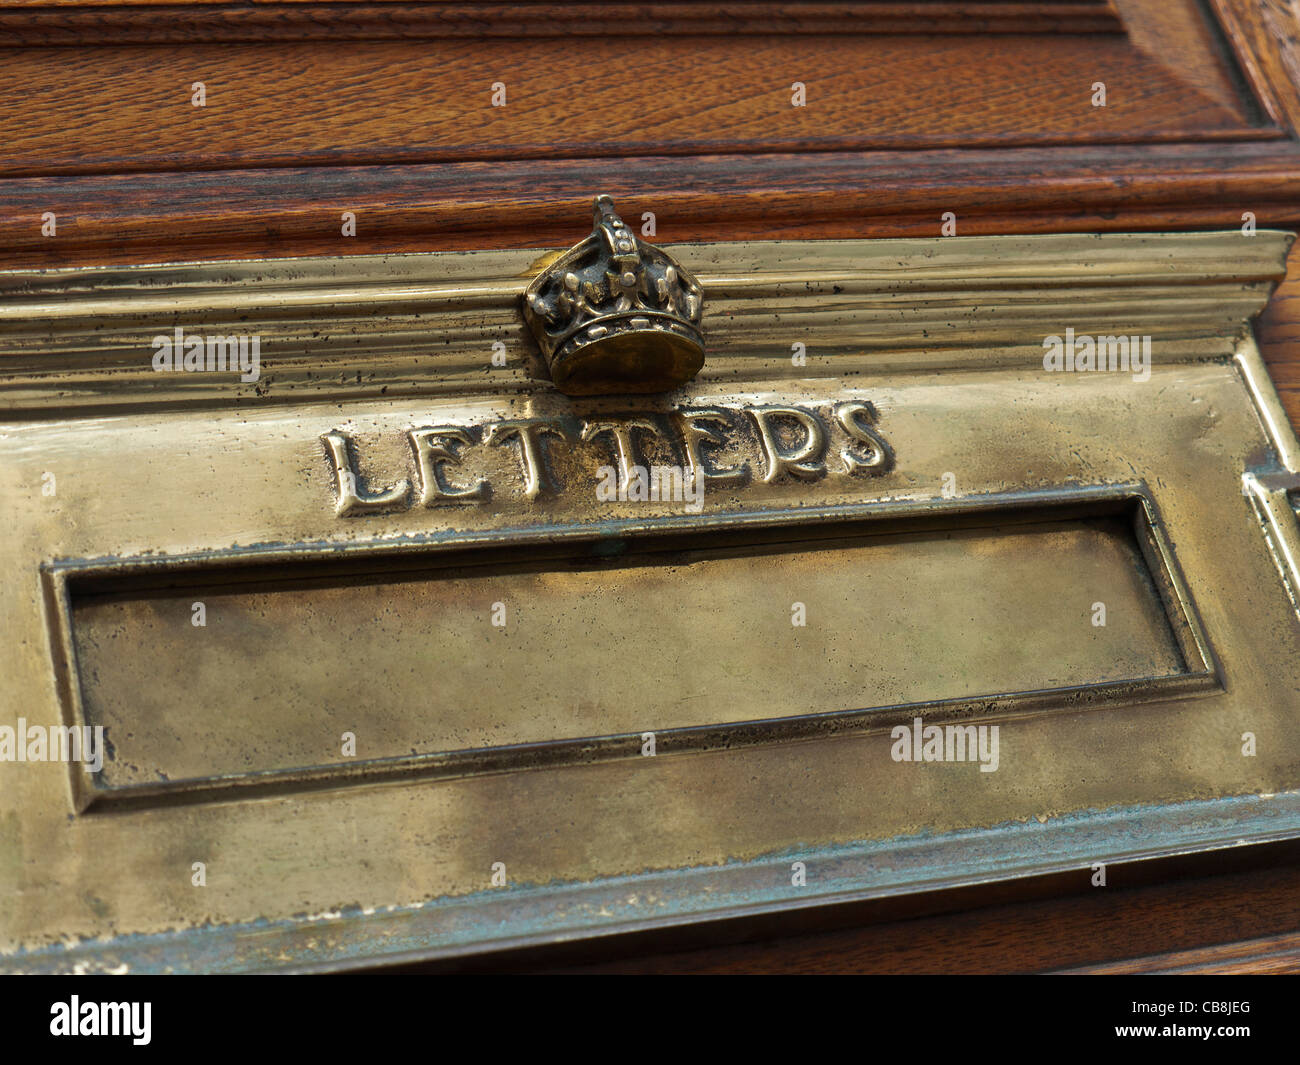 Crown crested official brass letter box on Government building door in central London UK Stock Photo